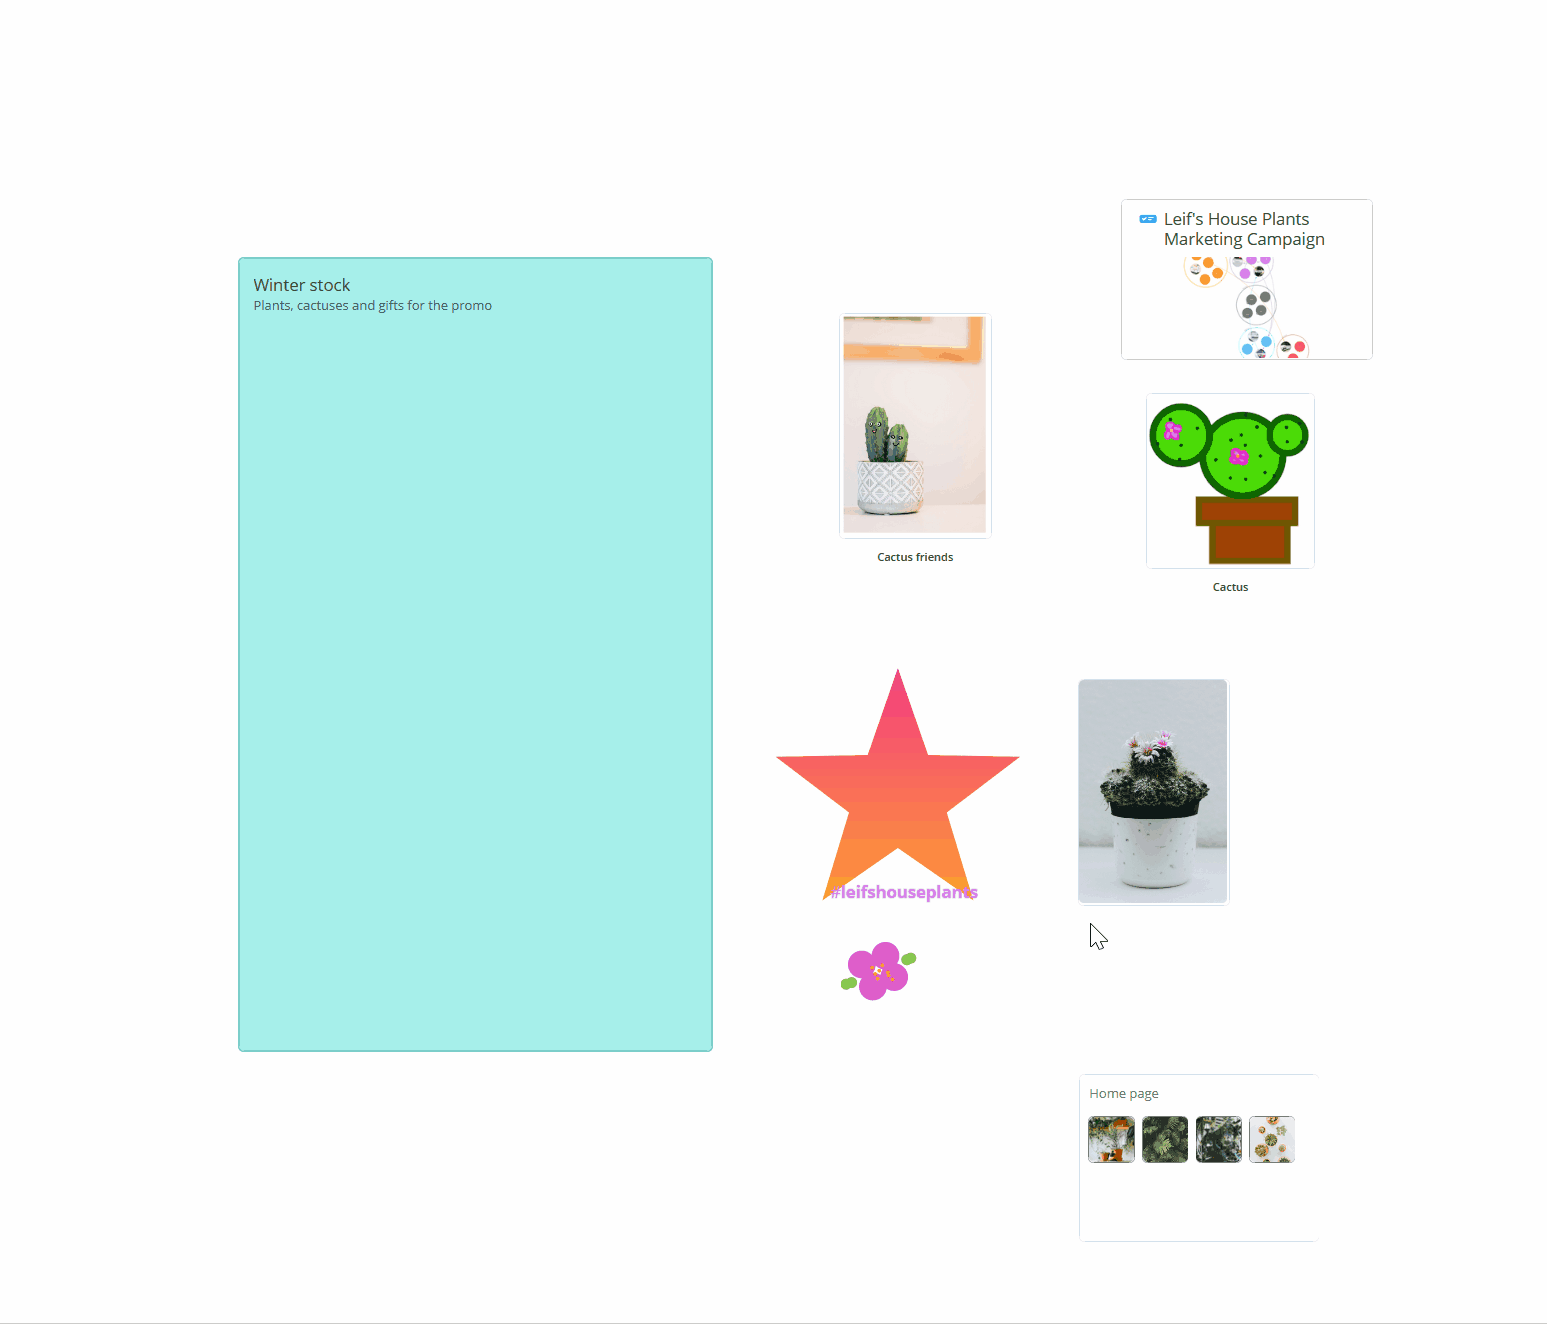 Drag sticky notes, images and other whiteboard items to your section